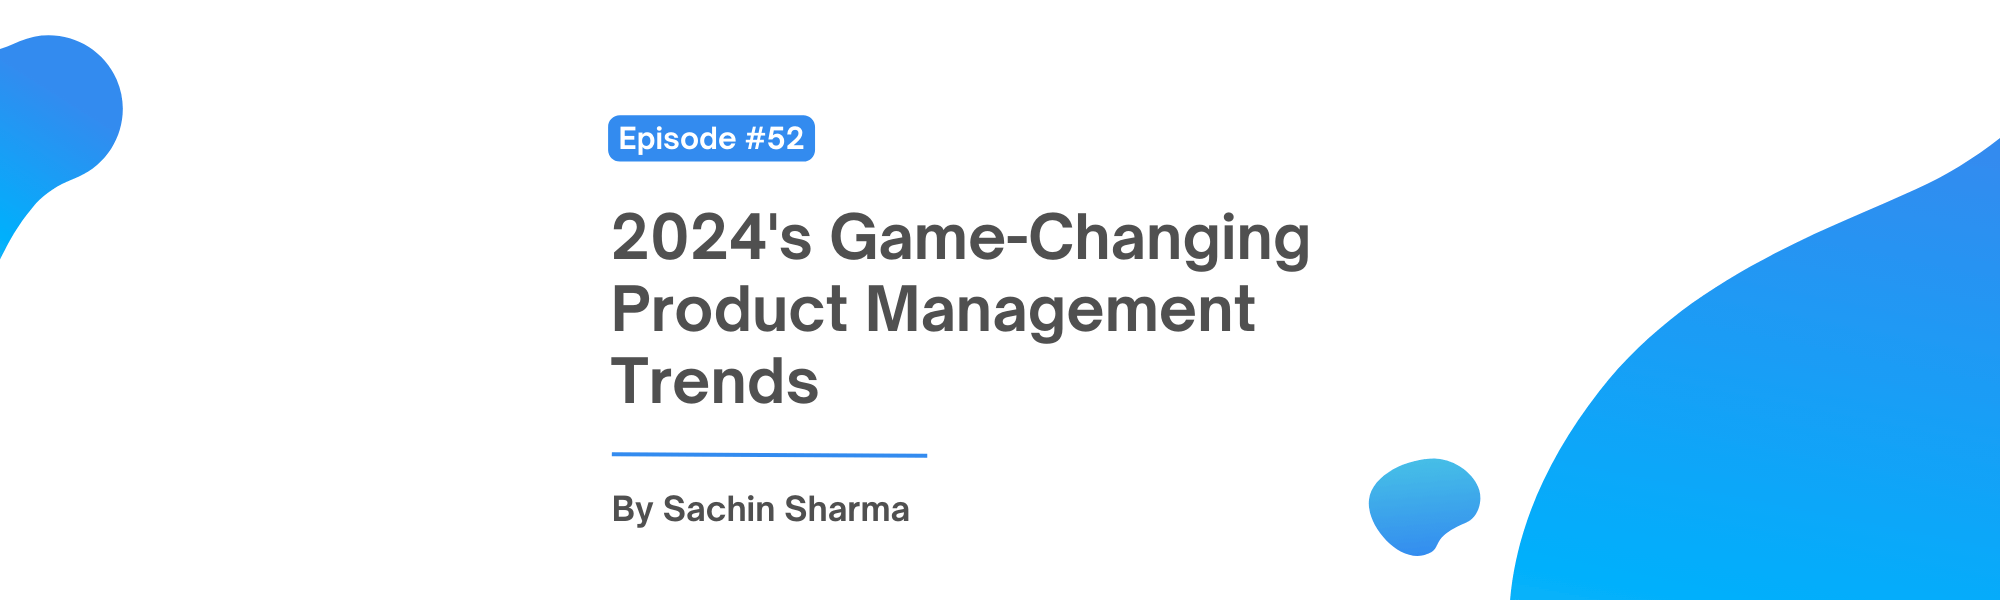 2024’s Game-Changing Product Management Trends